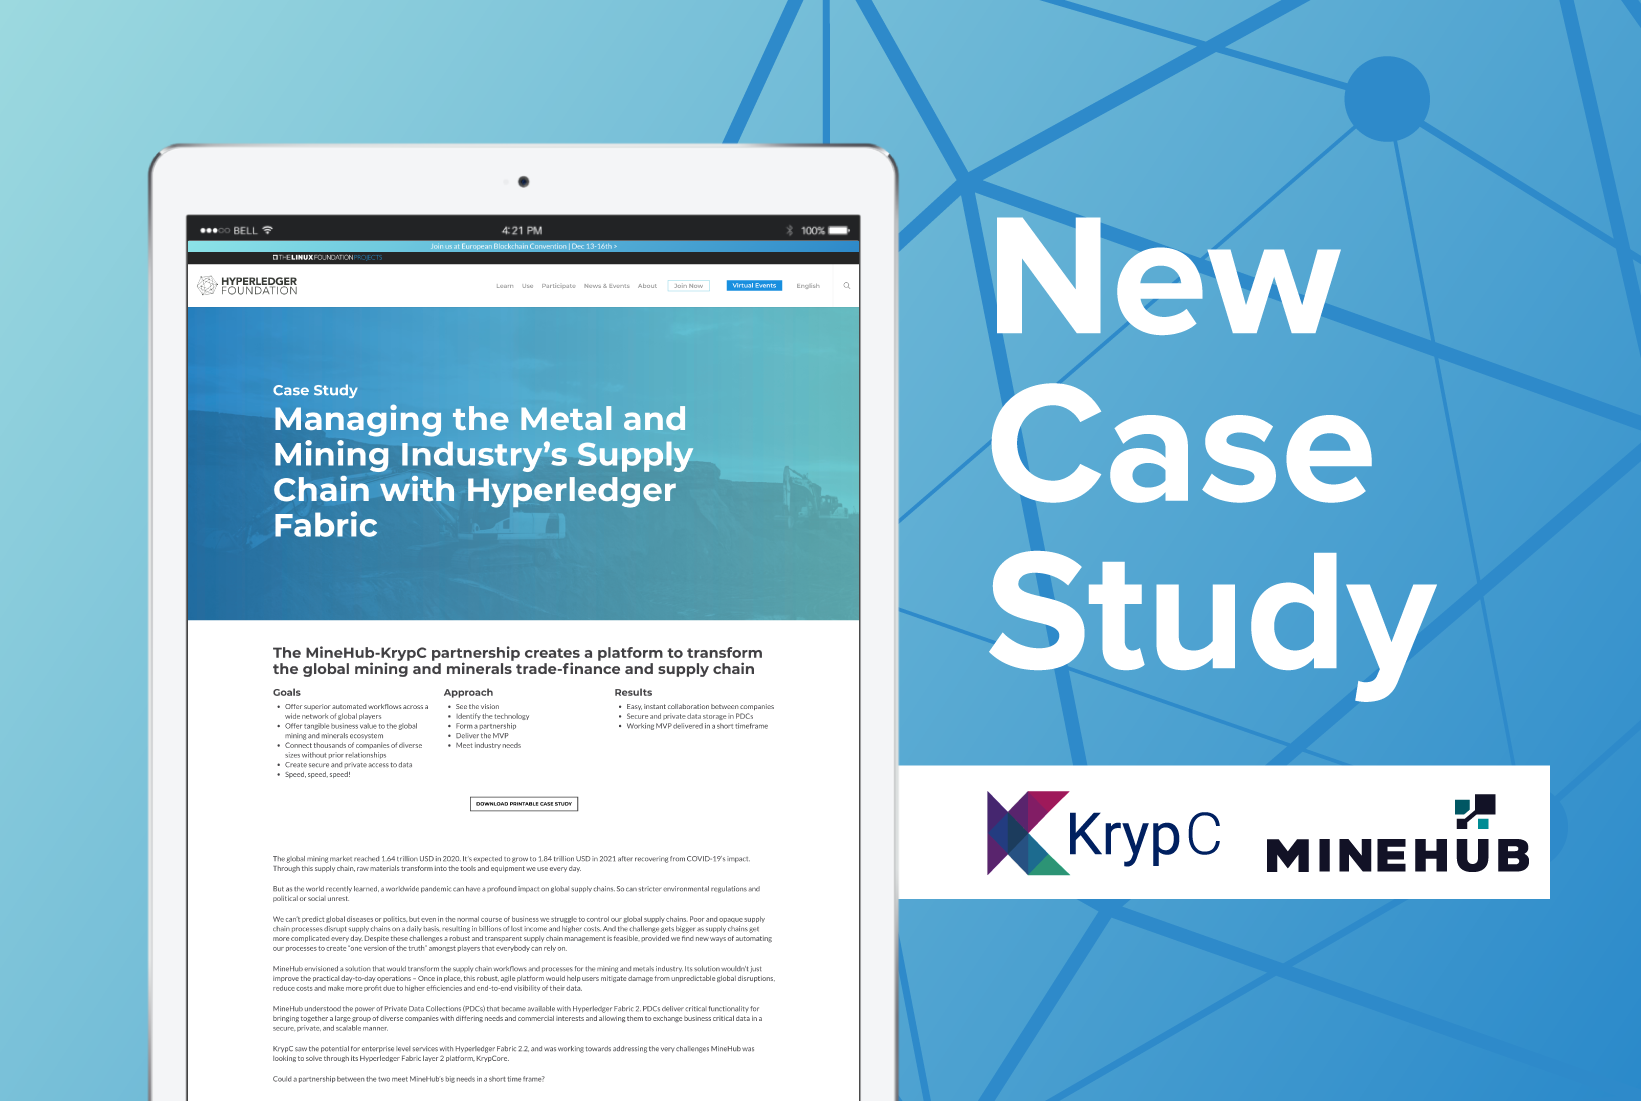 MineHub and KrypC Leverage the Power of Hyperledger Fabric 2.2 to Transform Mining and Metals Supply Chain